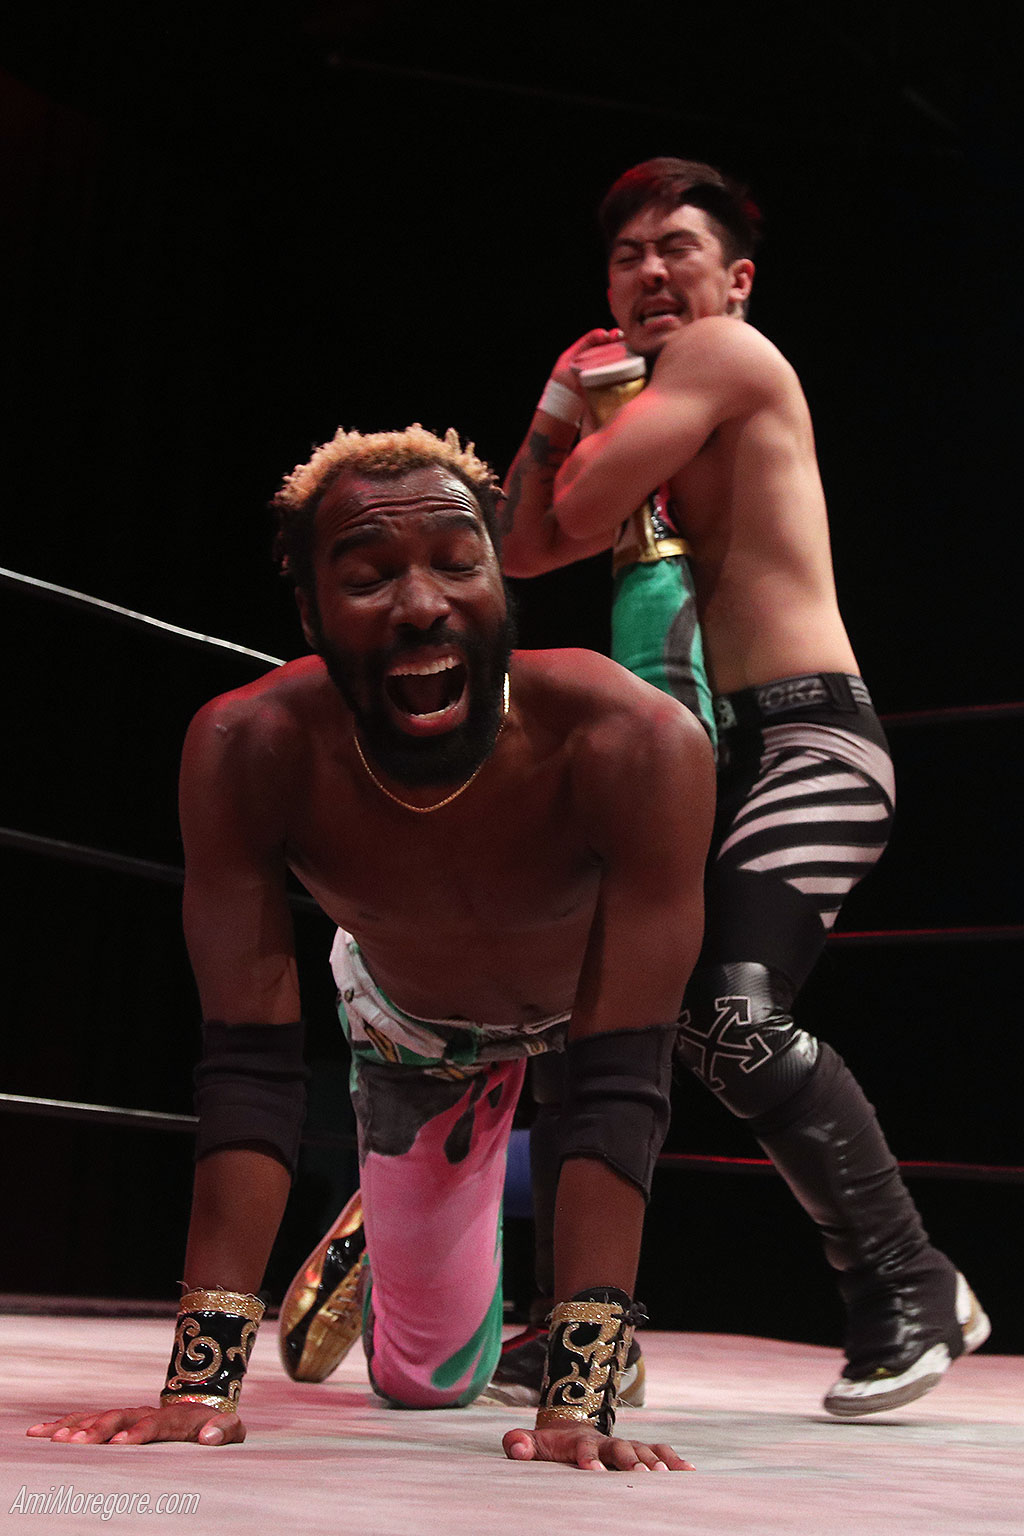 Yoya puts Cheeseburger into an elevated ankle lock - 2022